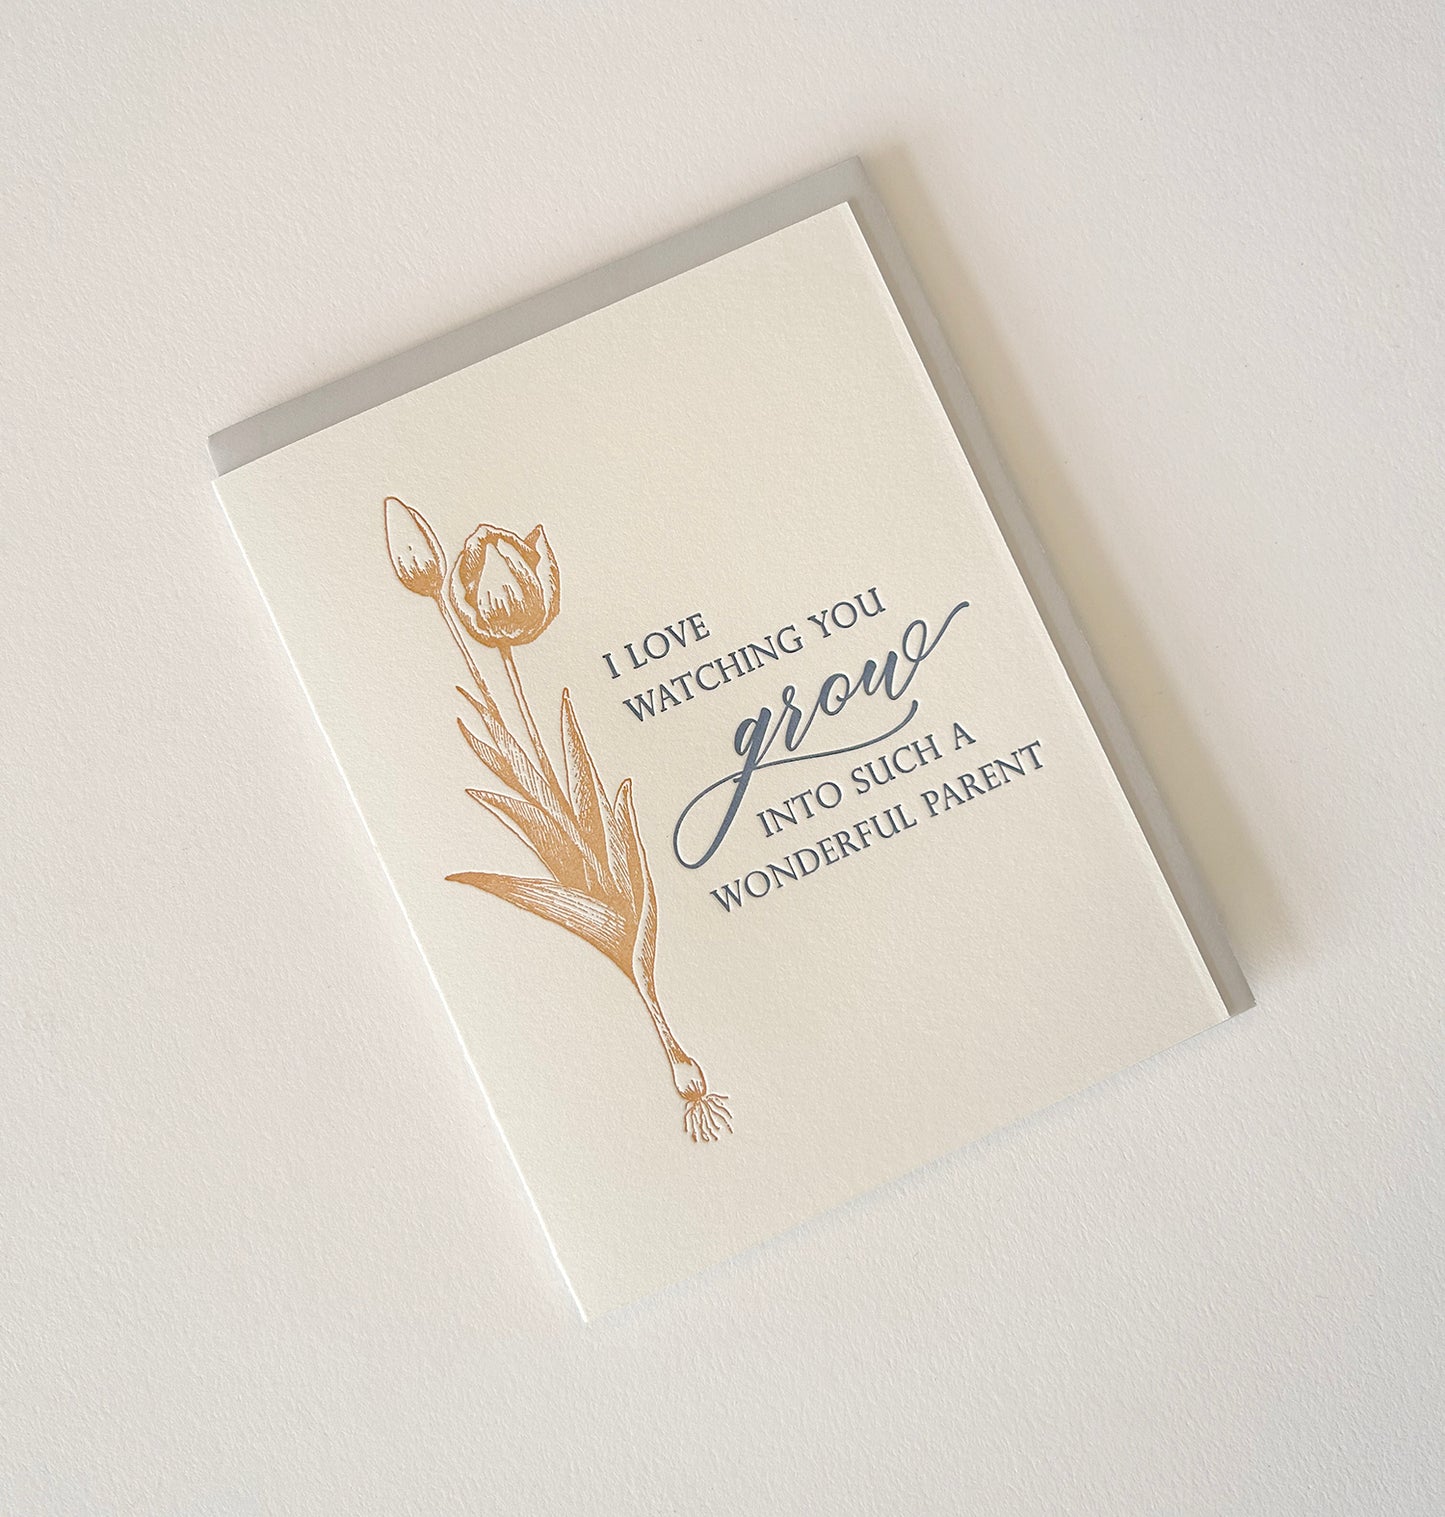 Letterpress encouragement card with florals that says "I love watching you grow into such a wonderful parent" by Rust Belt Love